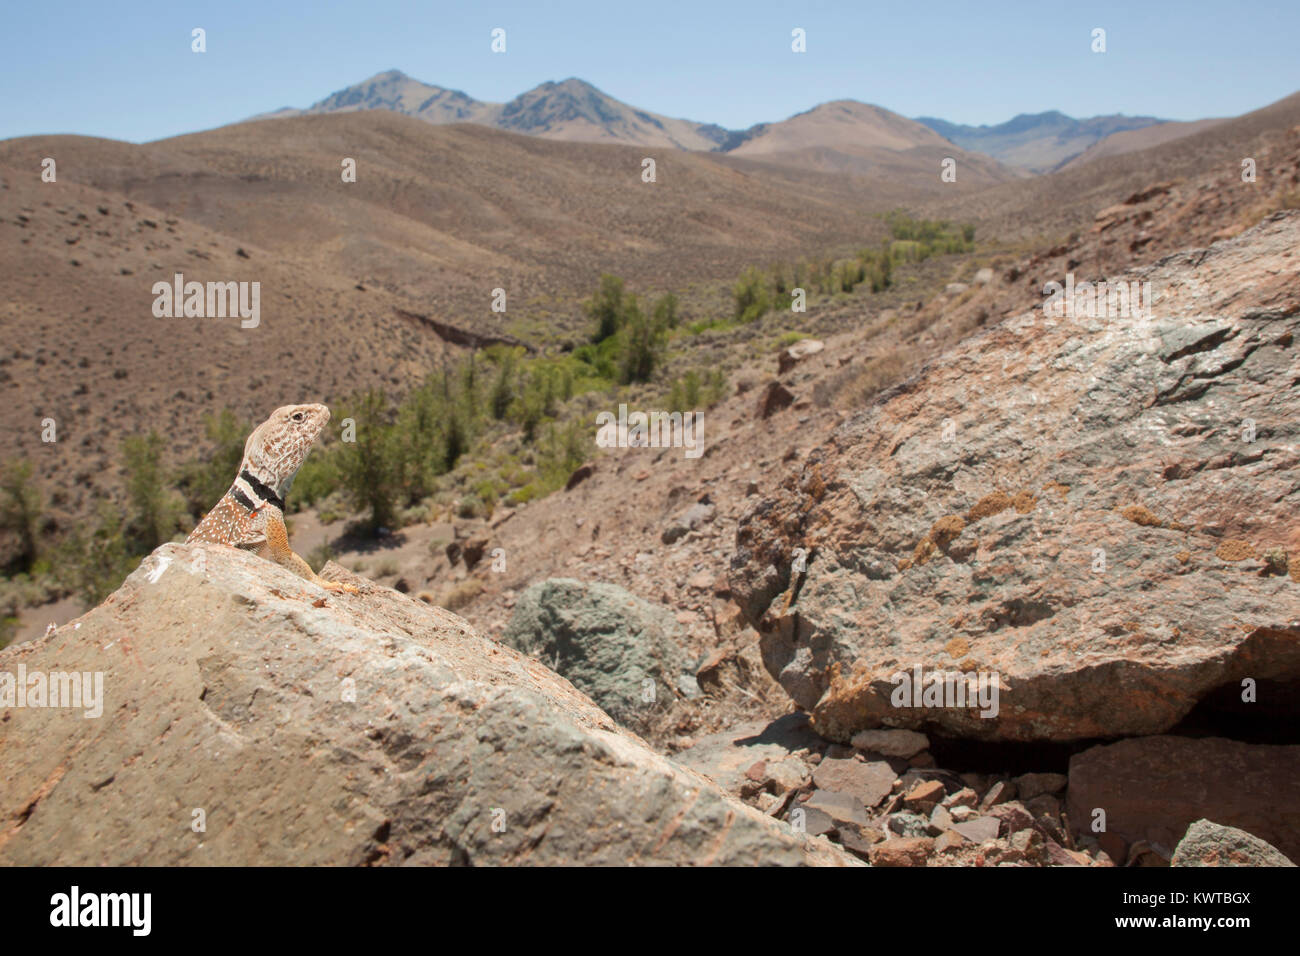 Great Basin collared lizard (Crotaphytus bicinctores), perched on a rock, with a sweeping view of a mountain range behind it. Stock Photo